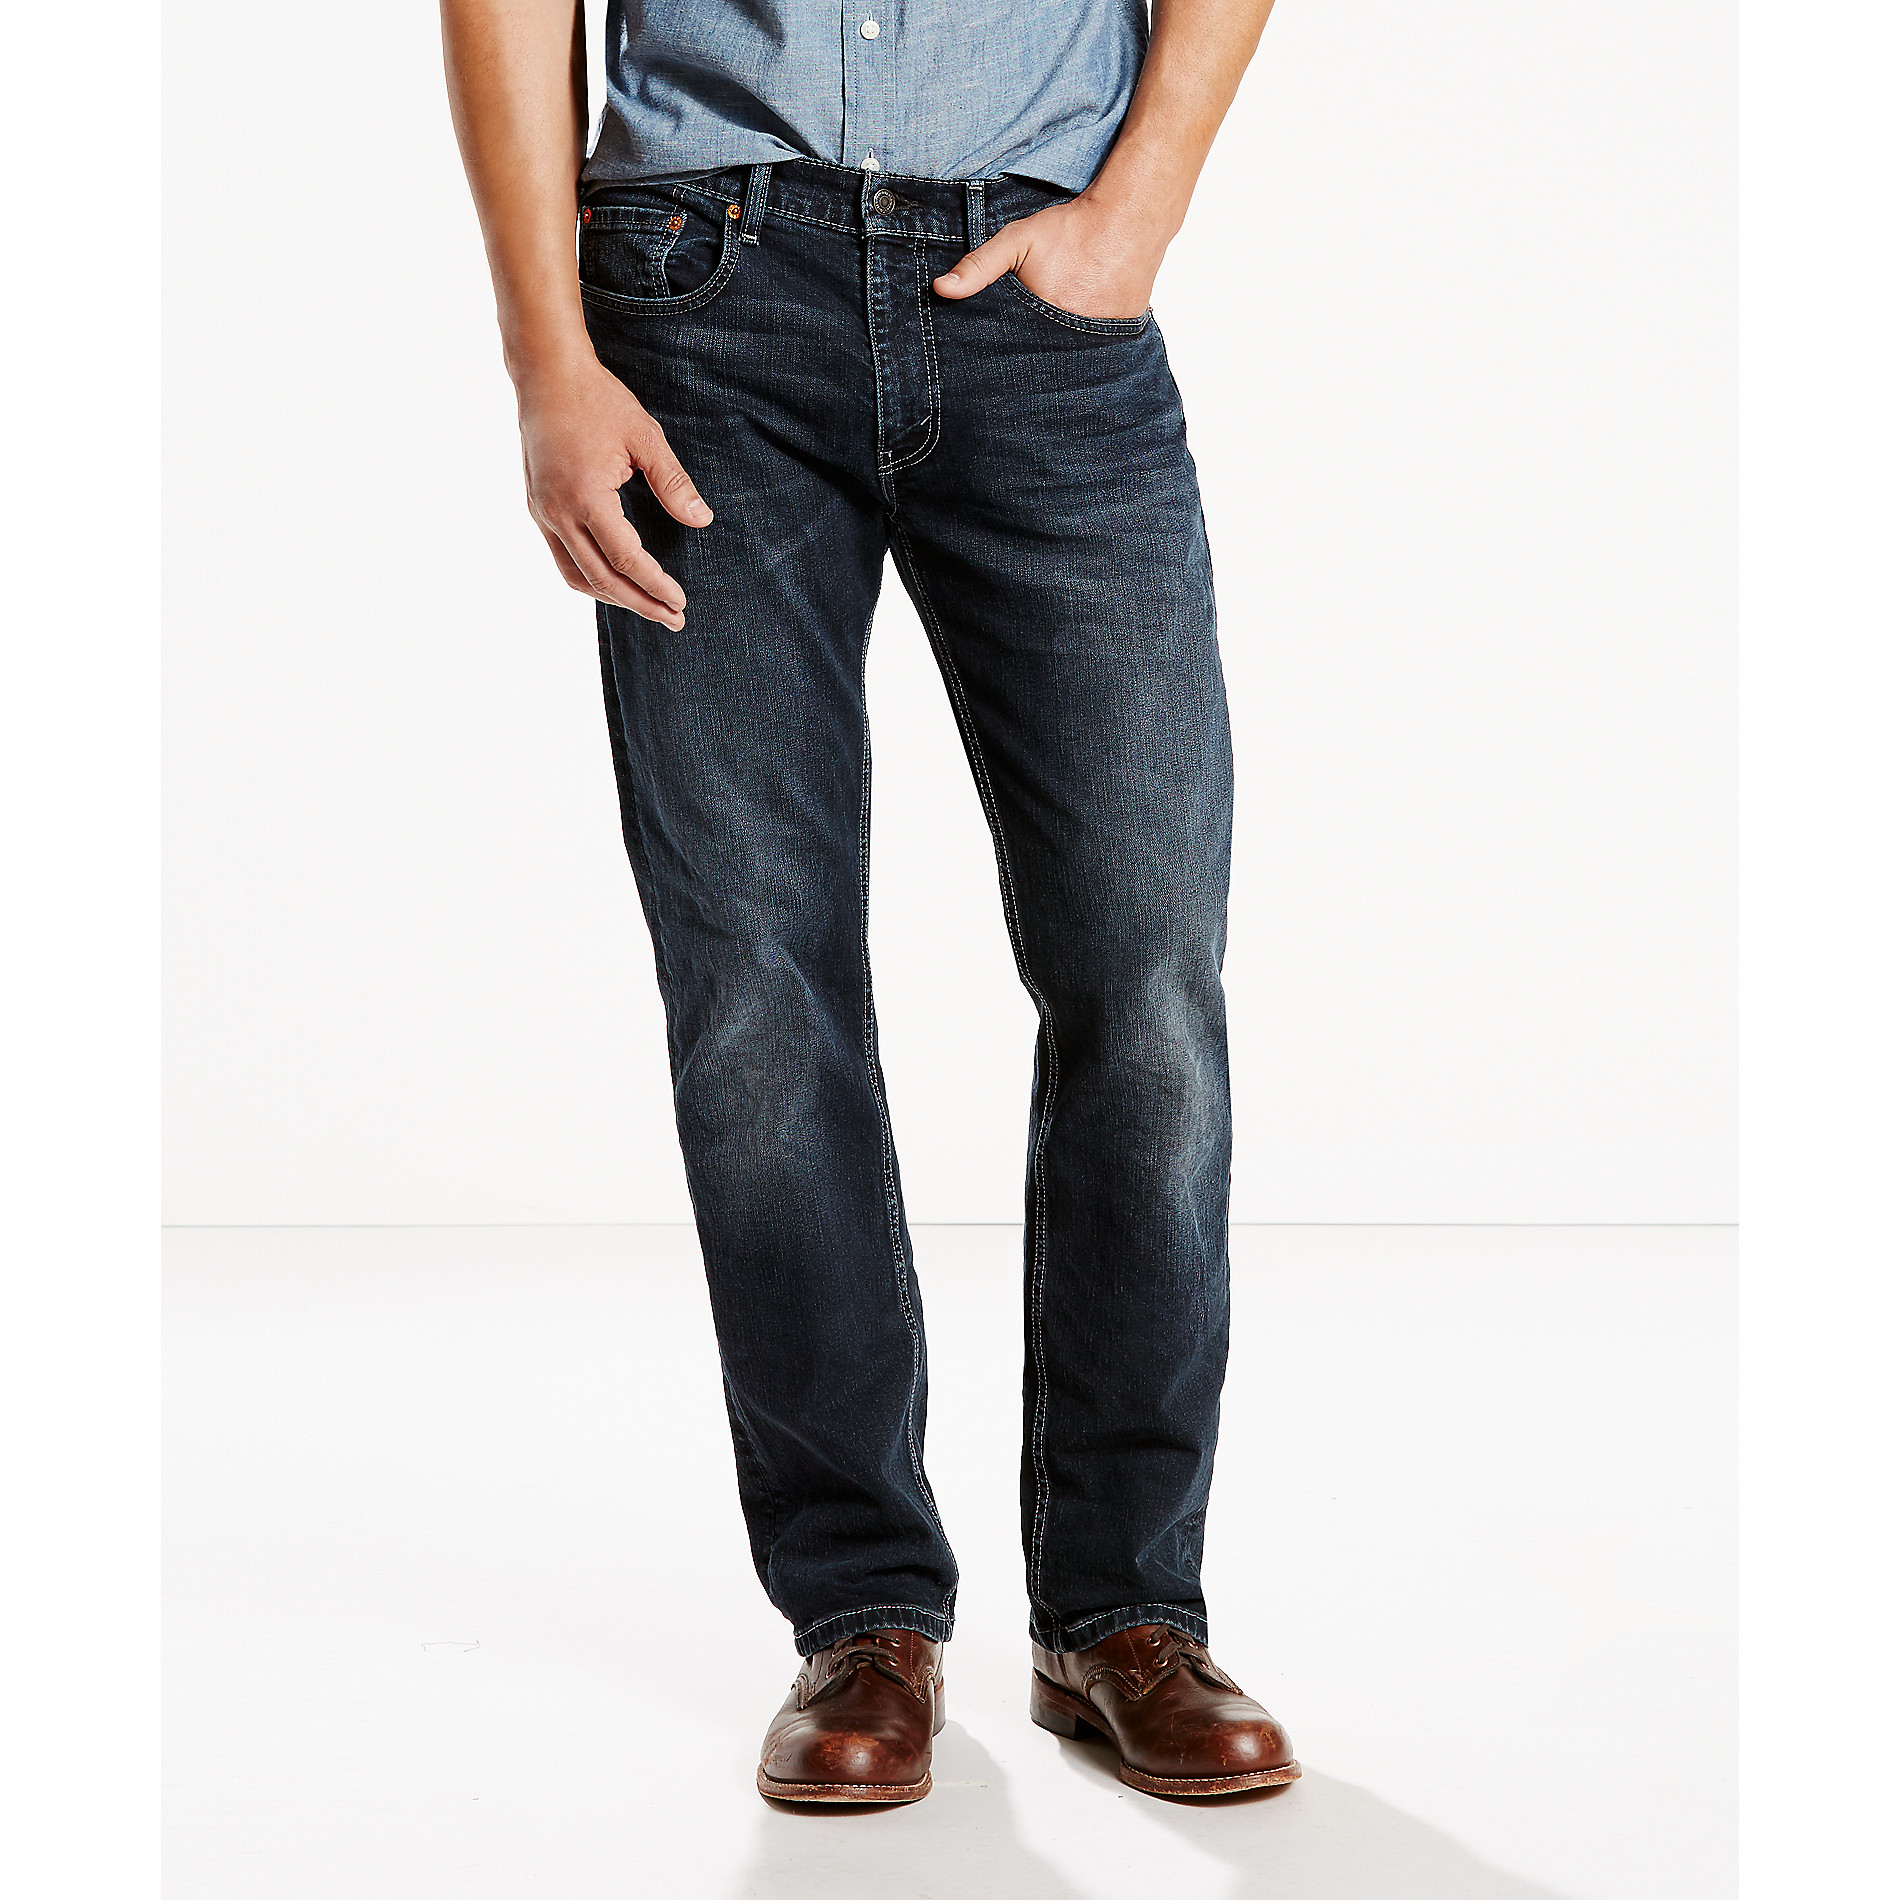 Levi's Men's 559 Relaxed Straight Jeans - Sears